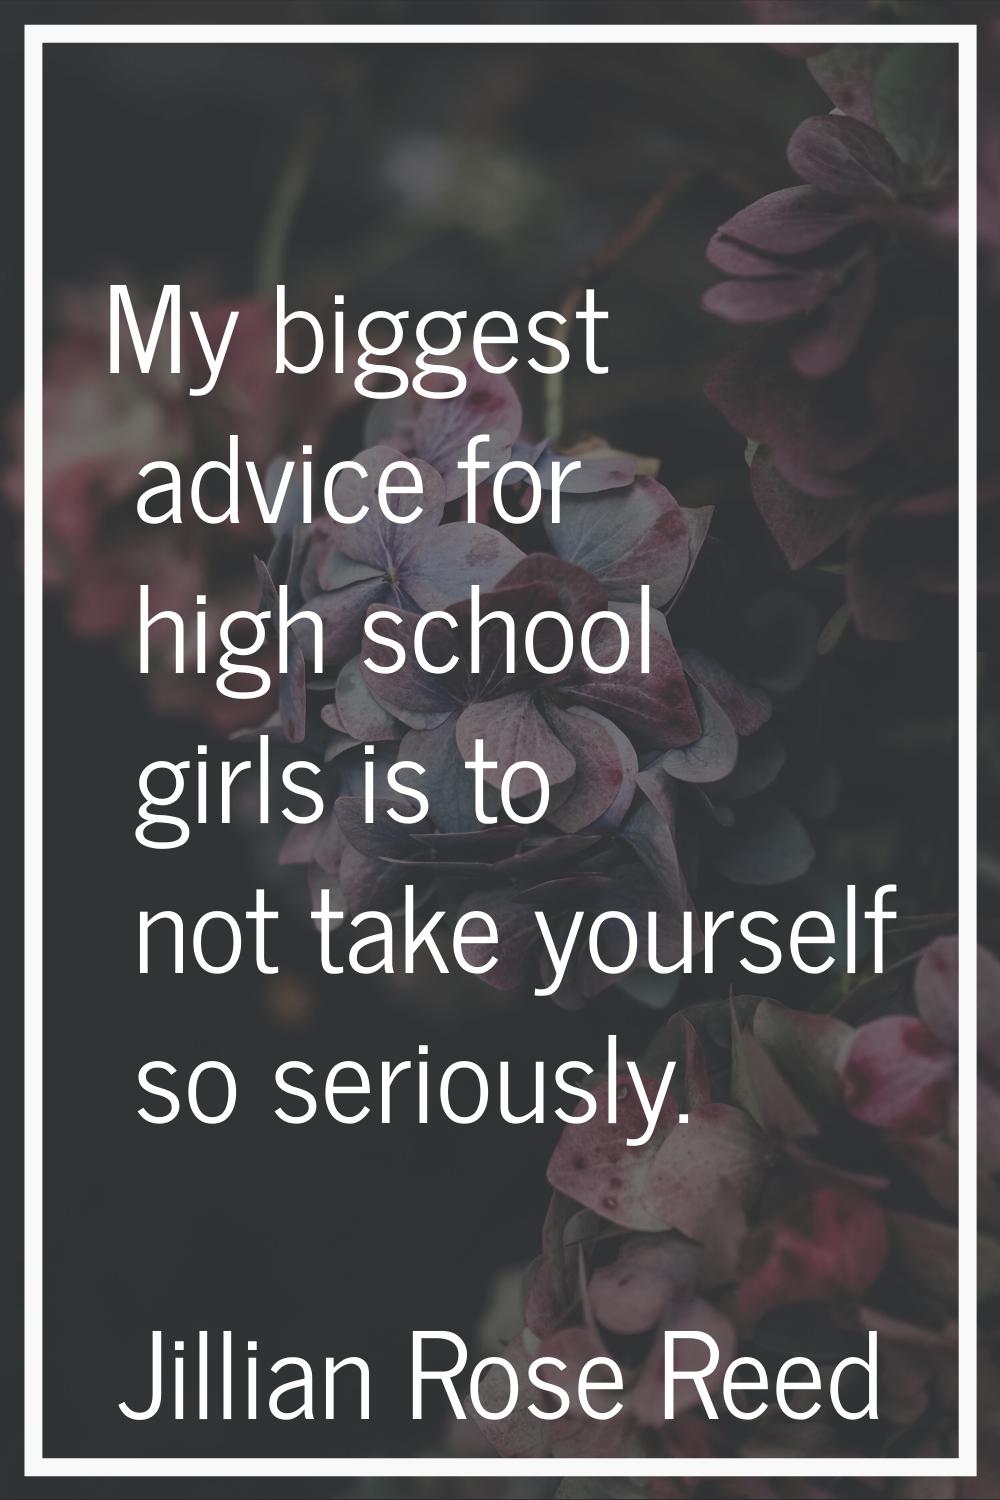 My biggest advice for high school girls is to not take yourself so seriously.